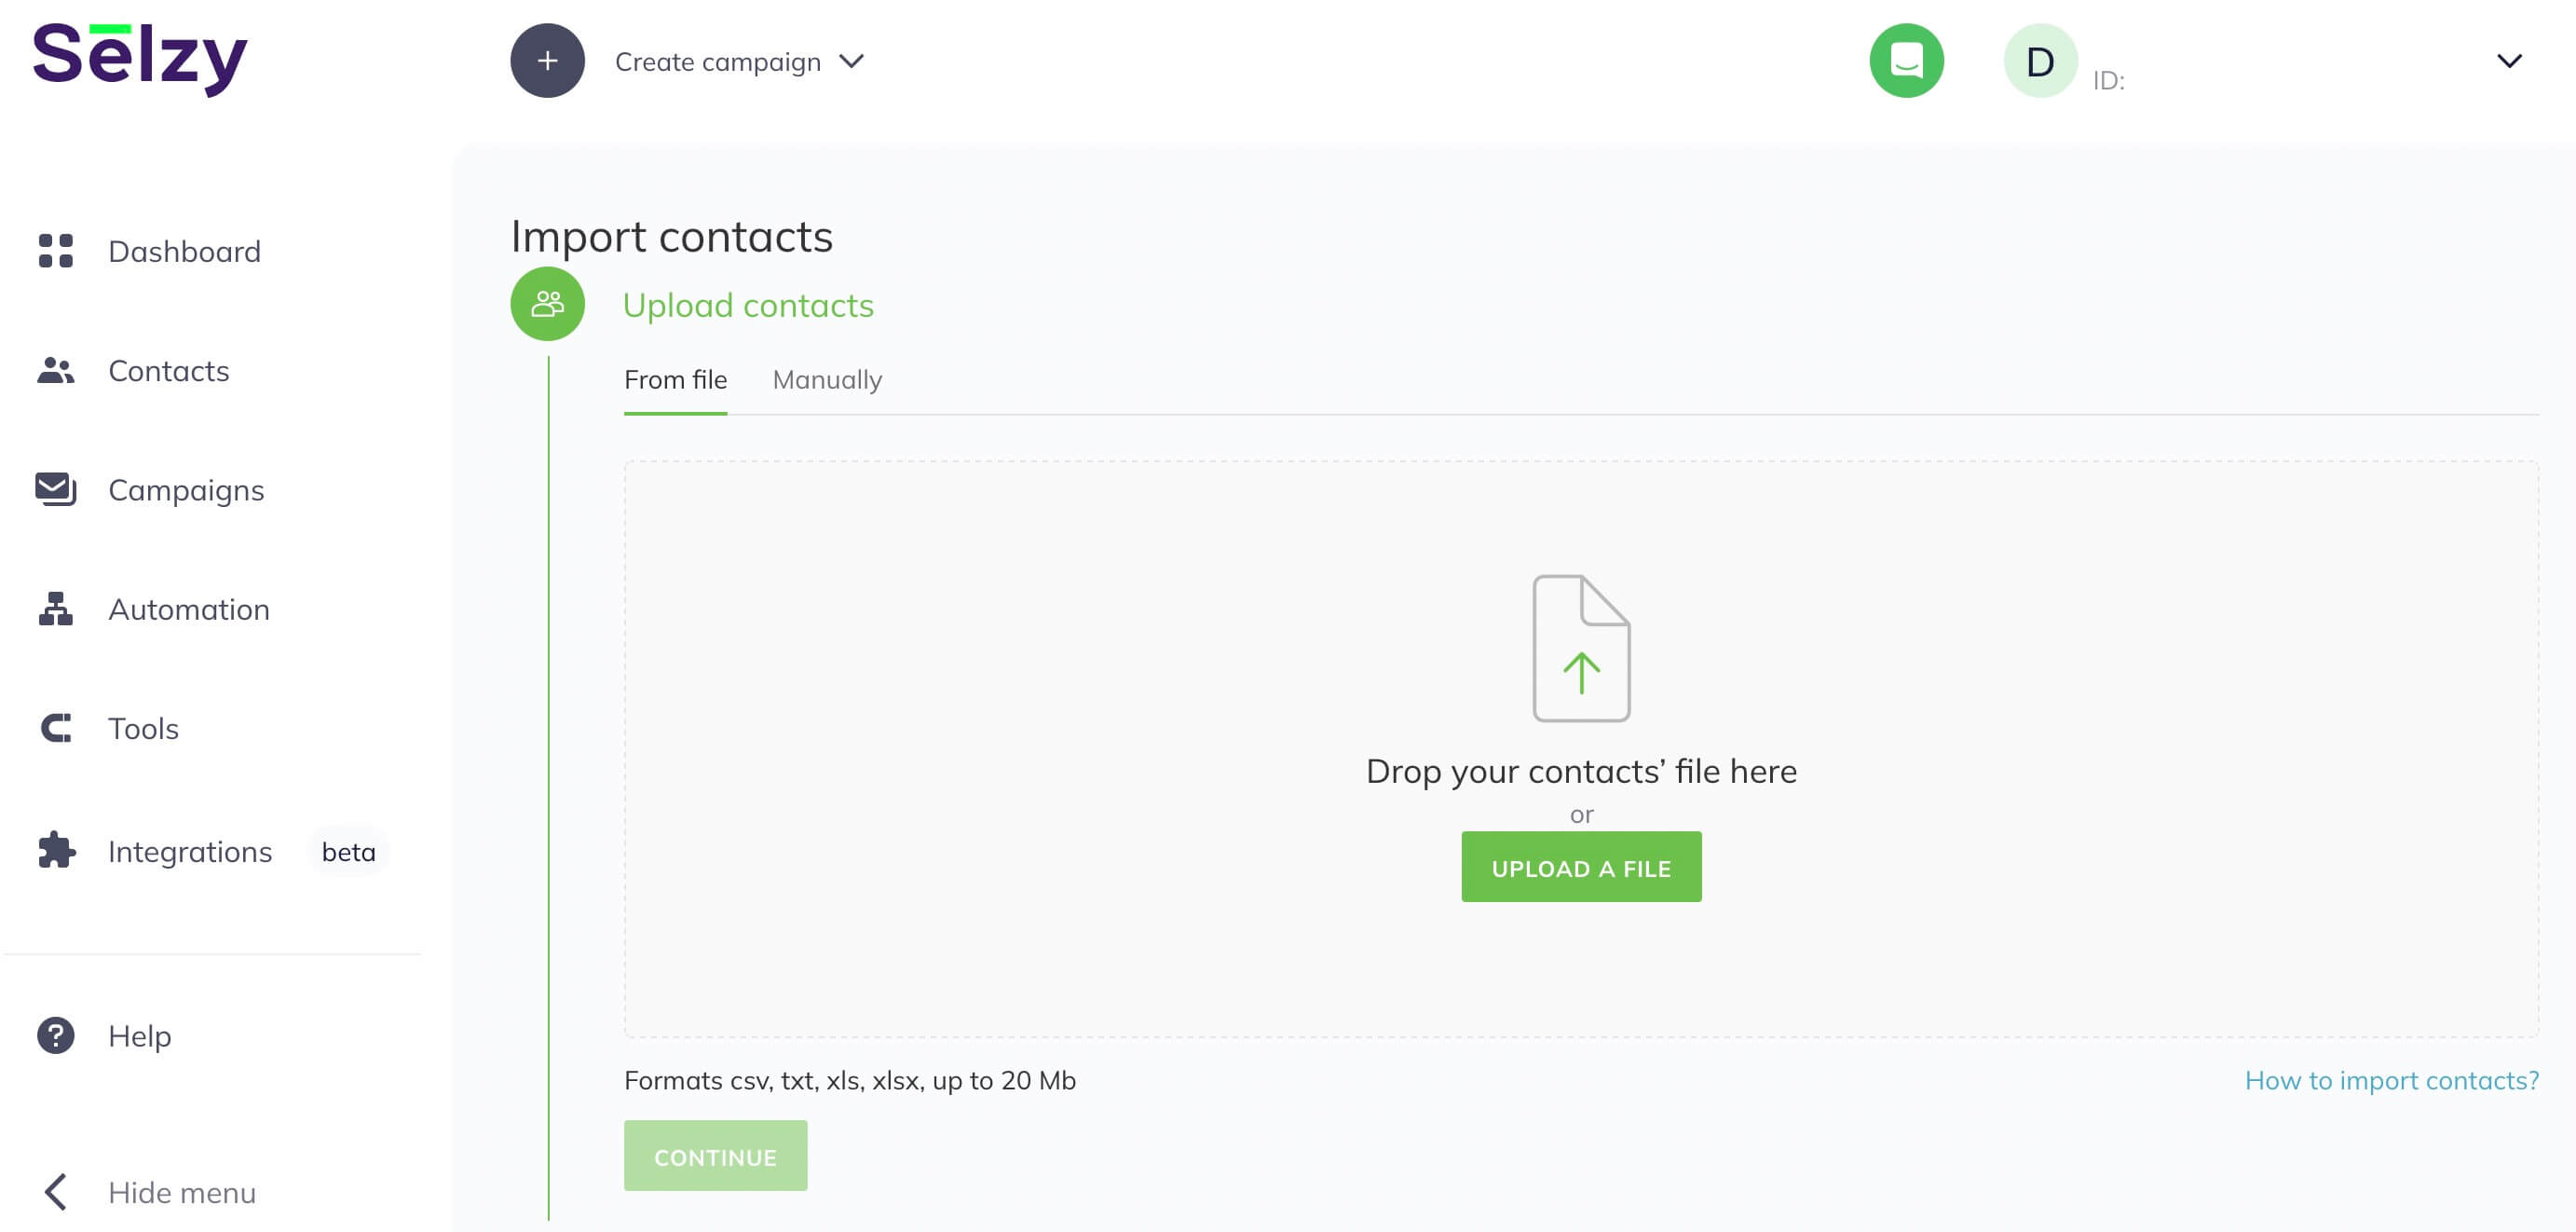 A screenshot of Selzy’s importing contacts process